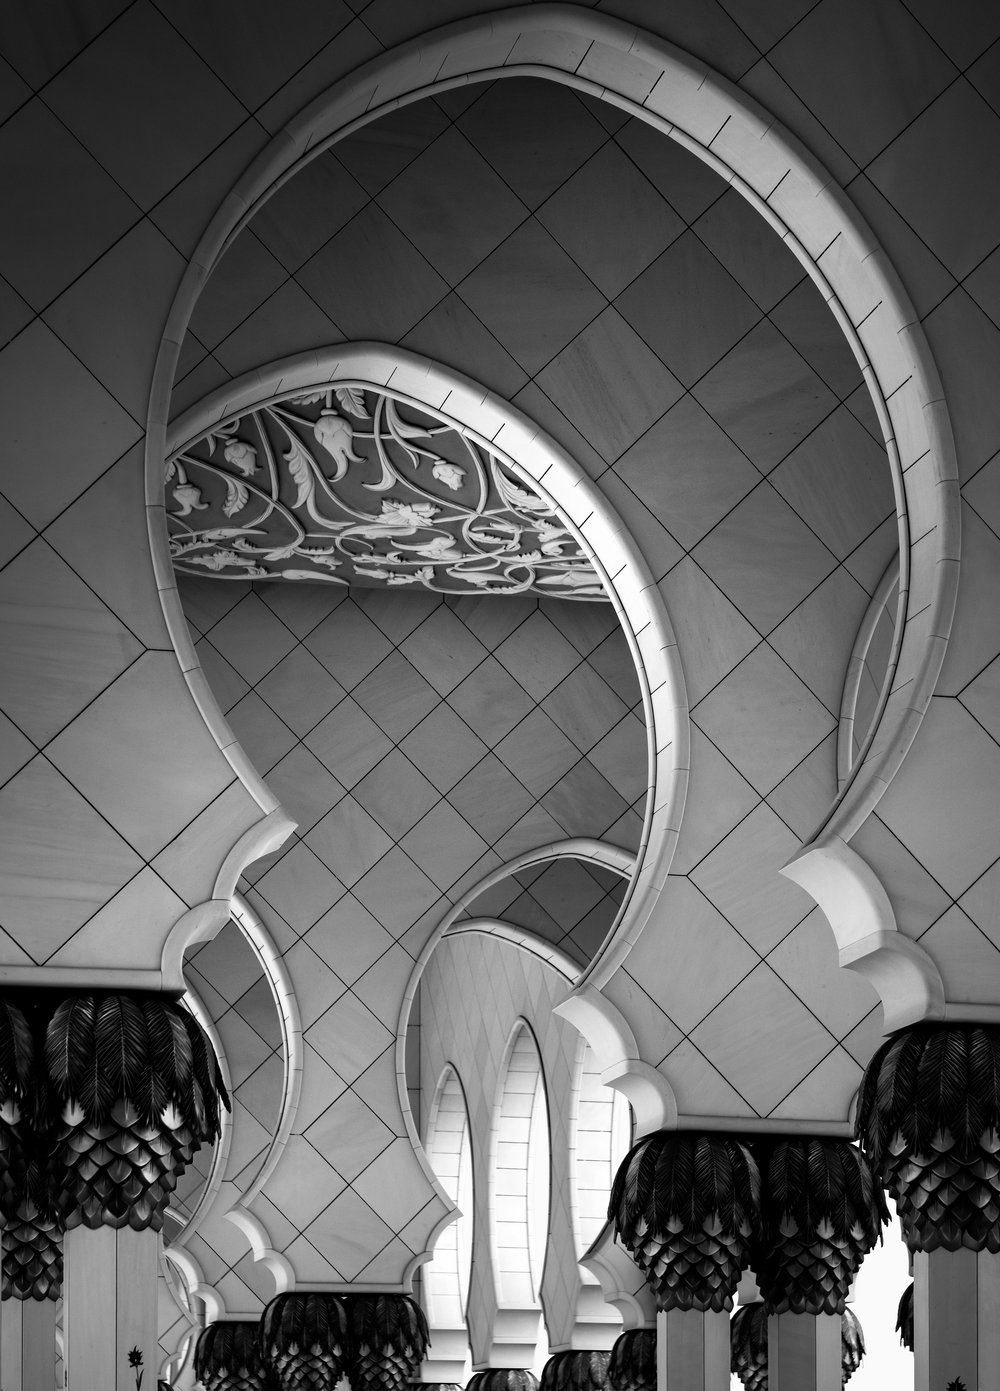 Architectural photos of Sheikh Zayed Mosque of Abu Dhabi.